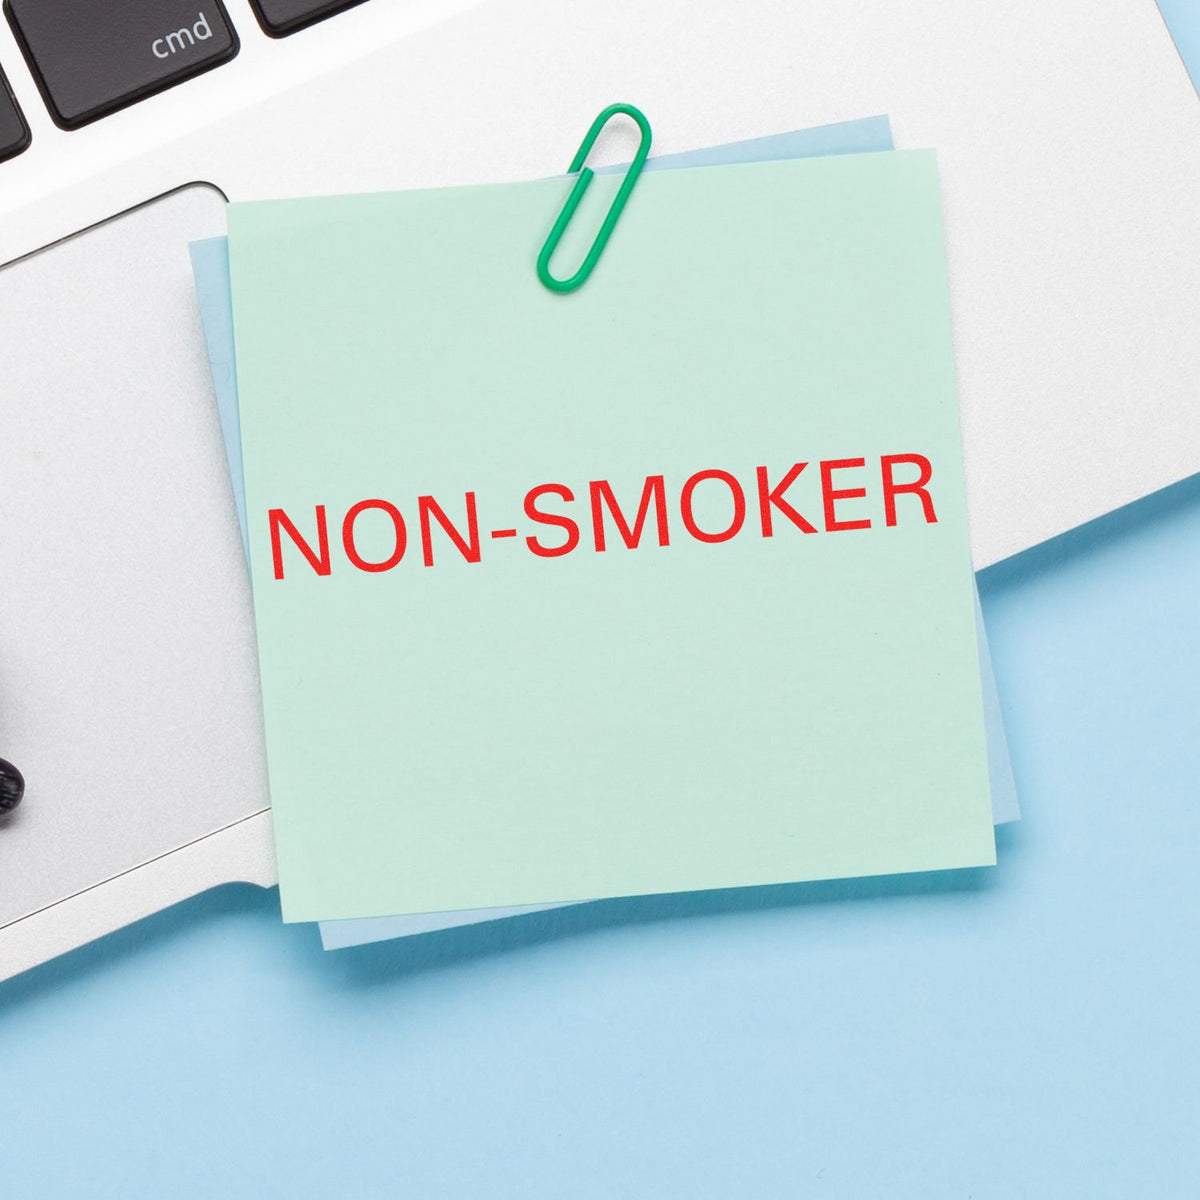 Large Non-Smoker Rubber Stamp In Use Photo